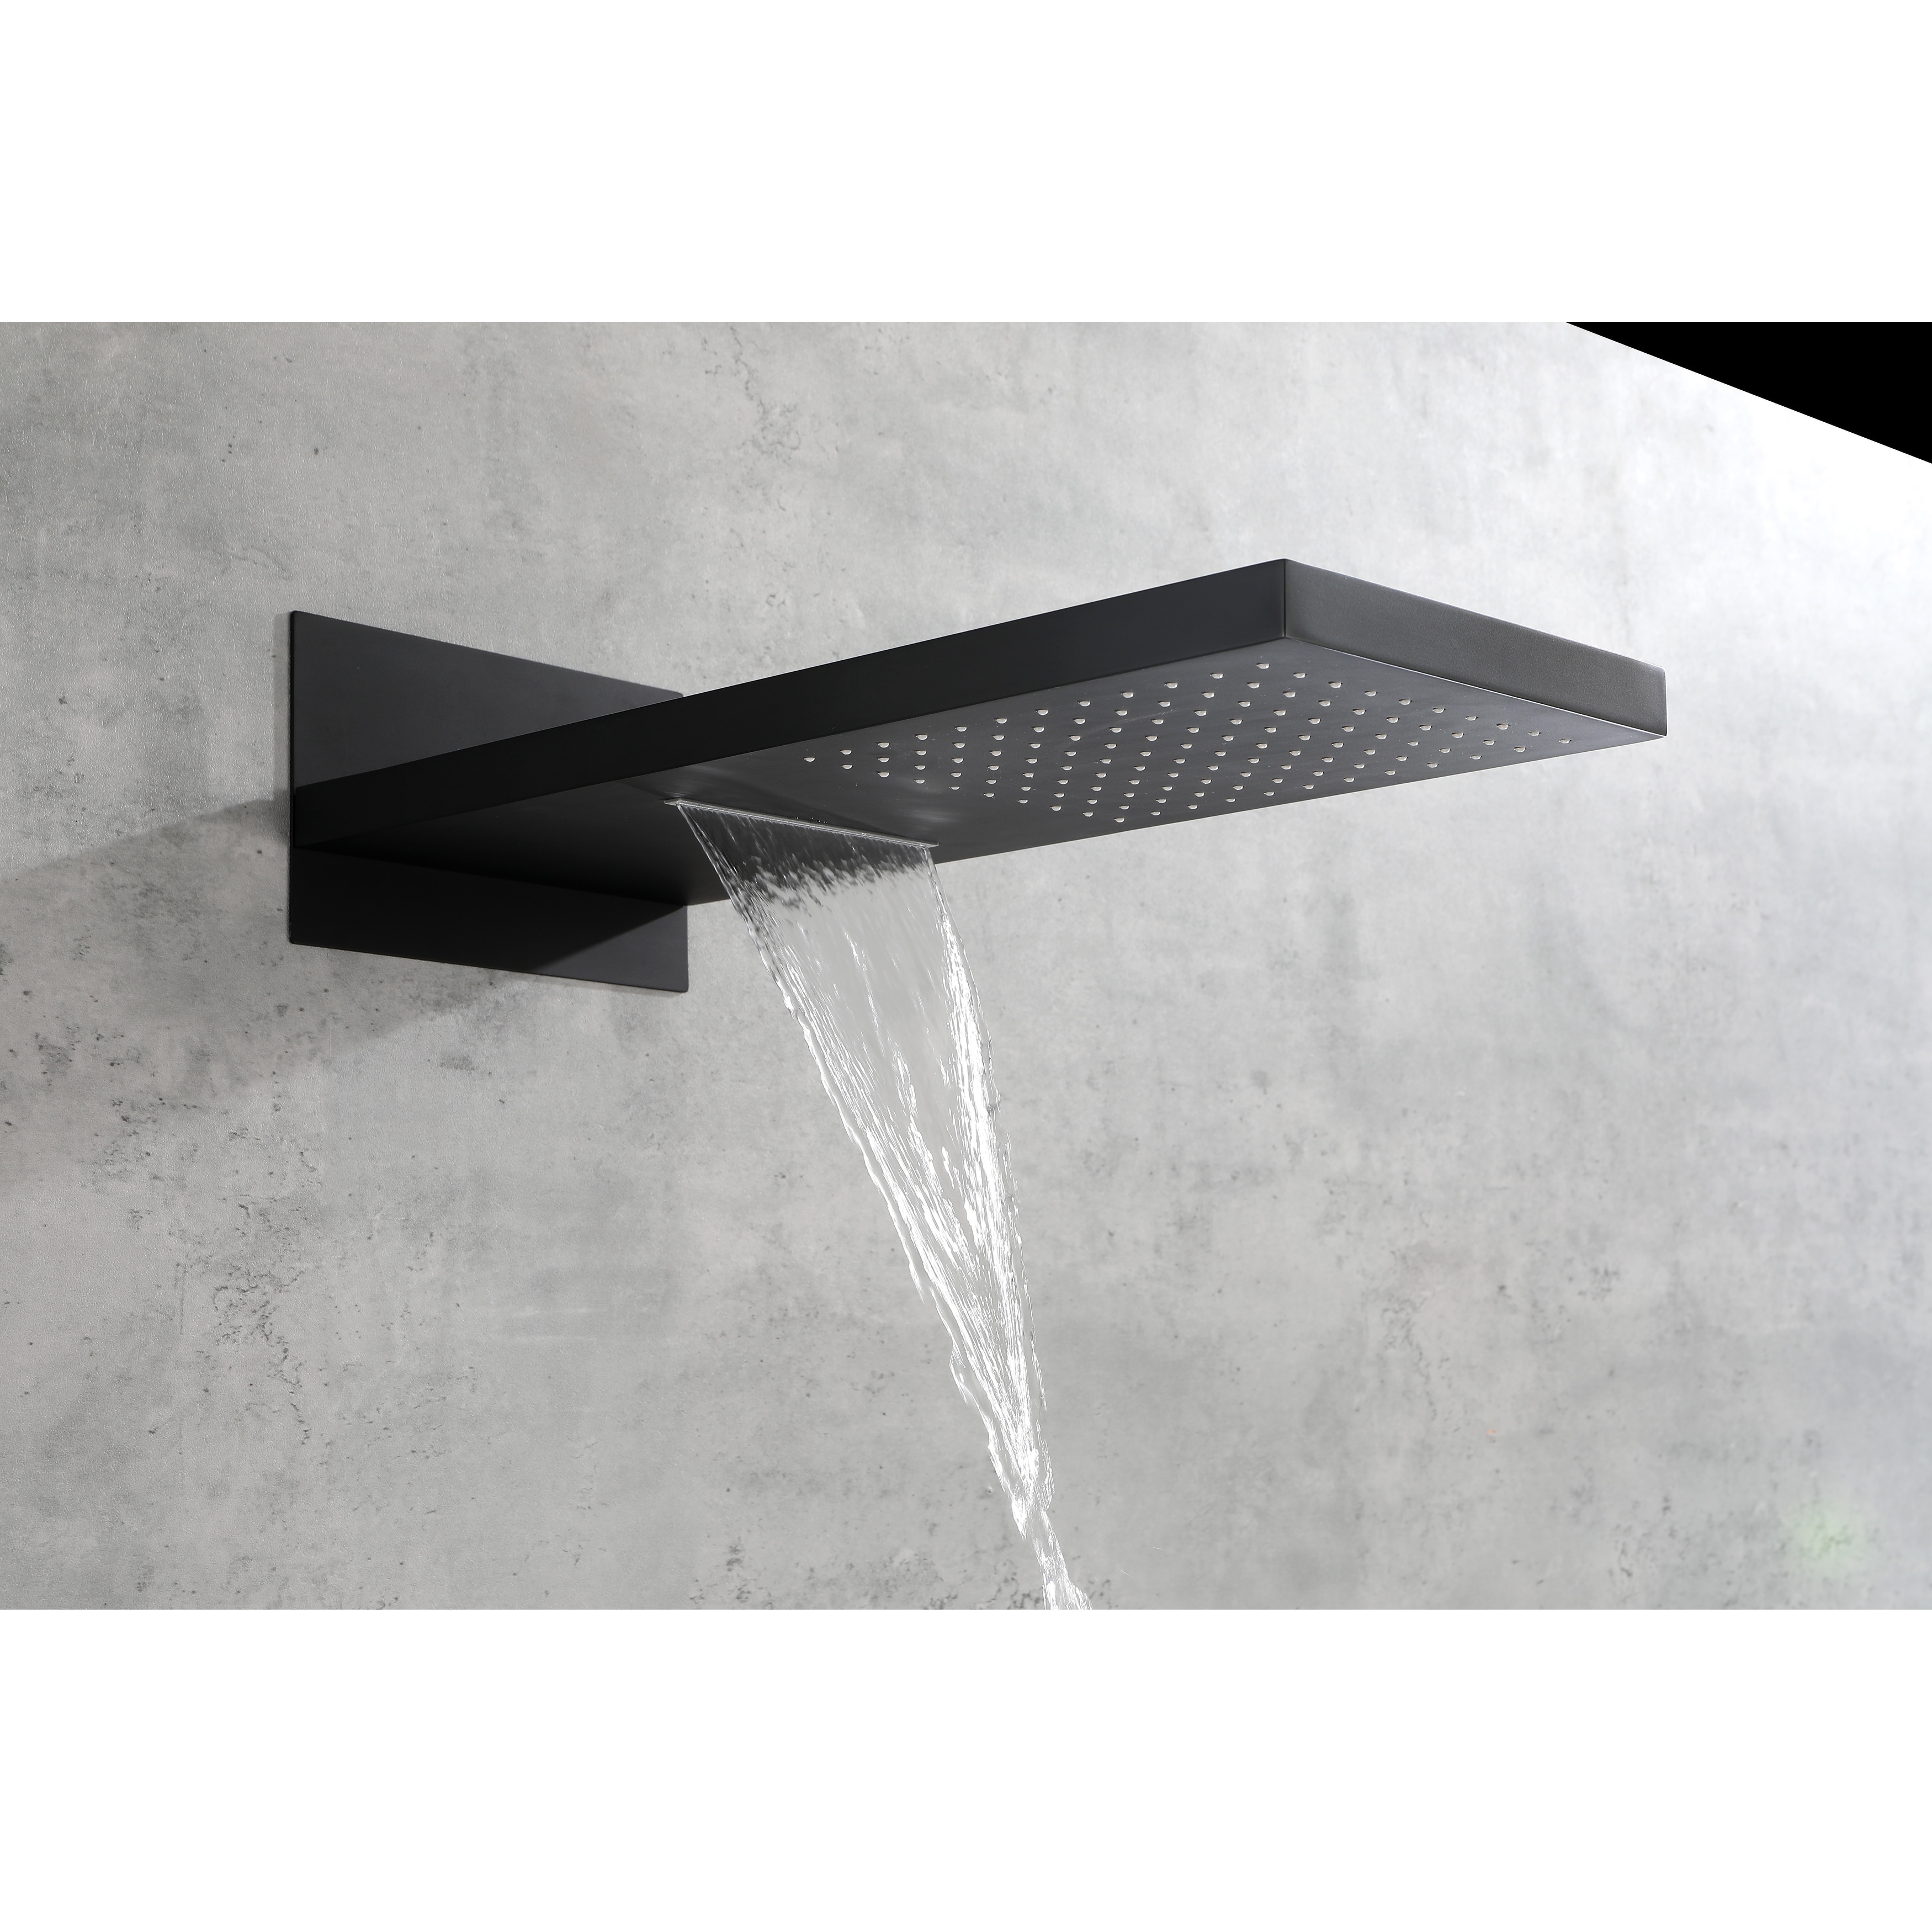 https://ak1.ostkcdn.com/images/products/is/images/direct/66ec28c546a5827139636423a34c40e5d54877e9/Shower-System%2CWaterfall-Rainfall-Shower-Head-with-Handheld%2C-Shower-Faucet-for-Bathroom%2C-Wall-Mounted%2C-Matt-Black.jpg